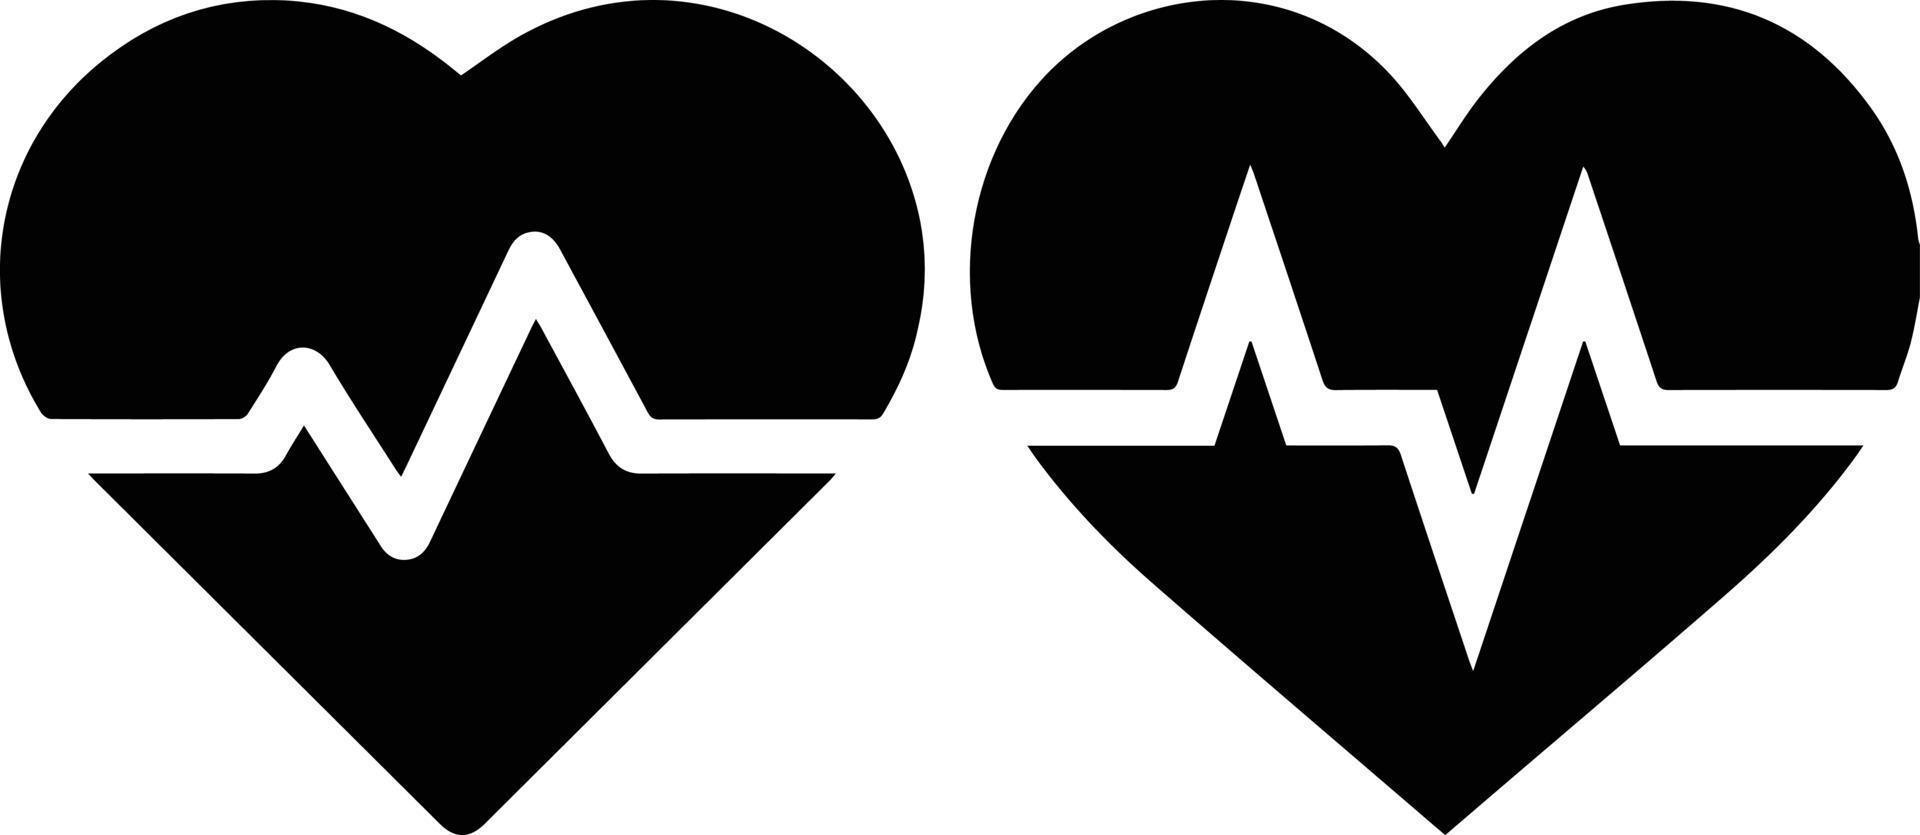 Heartbeat icon collection. Heartbeat line with the shape of a heart. heart beat pulse flat icon vector